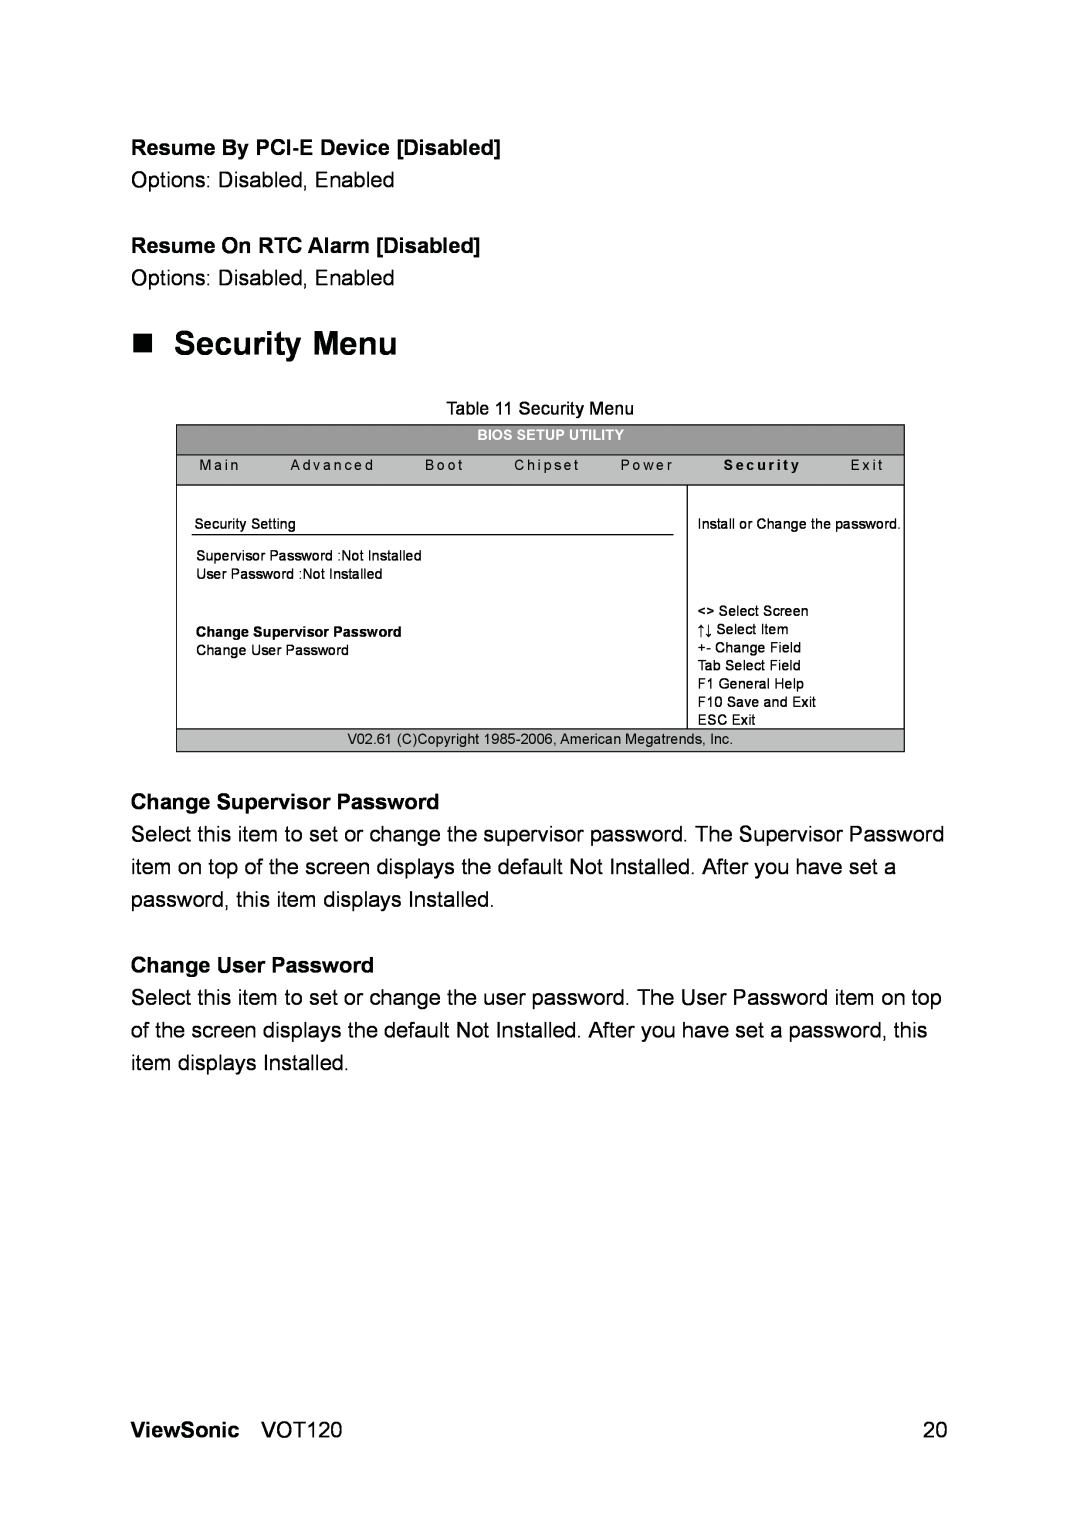 ViewSonic VS12869 „ Security Menu, Resume By PCI-E Device Disabled, Resume On RTC Alarm Disabled, Change User Password 